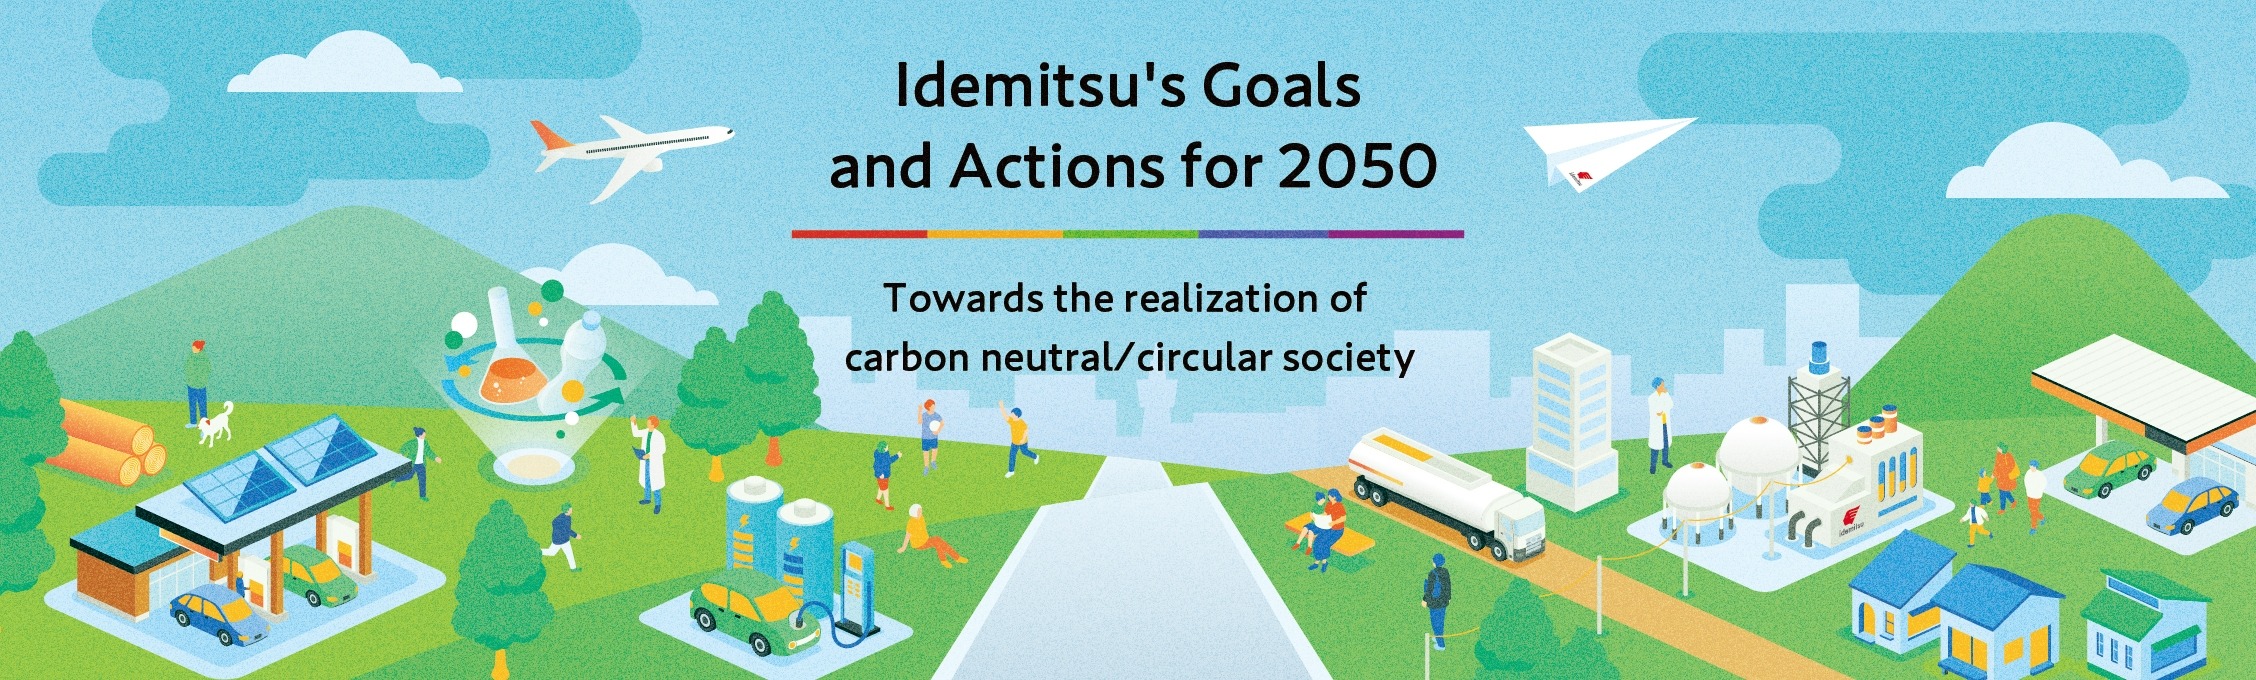 idemitsu's goals for 2050 and actions Toward the realization of a carbon-neutral and recycling-oriented society